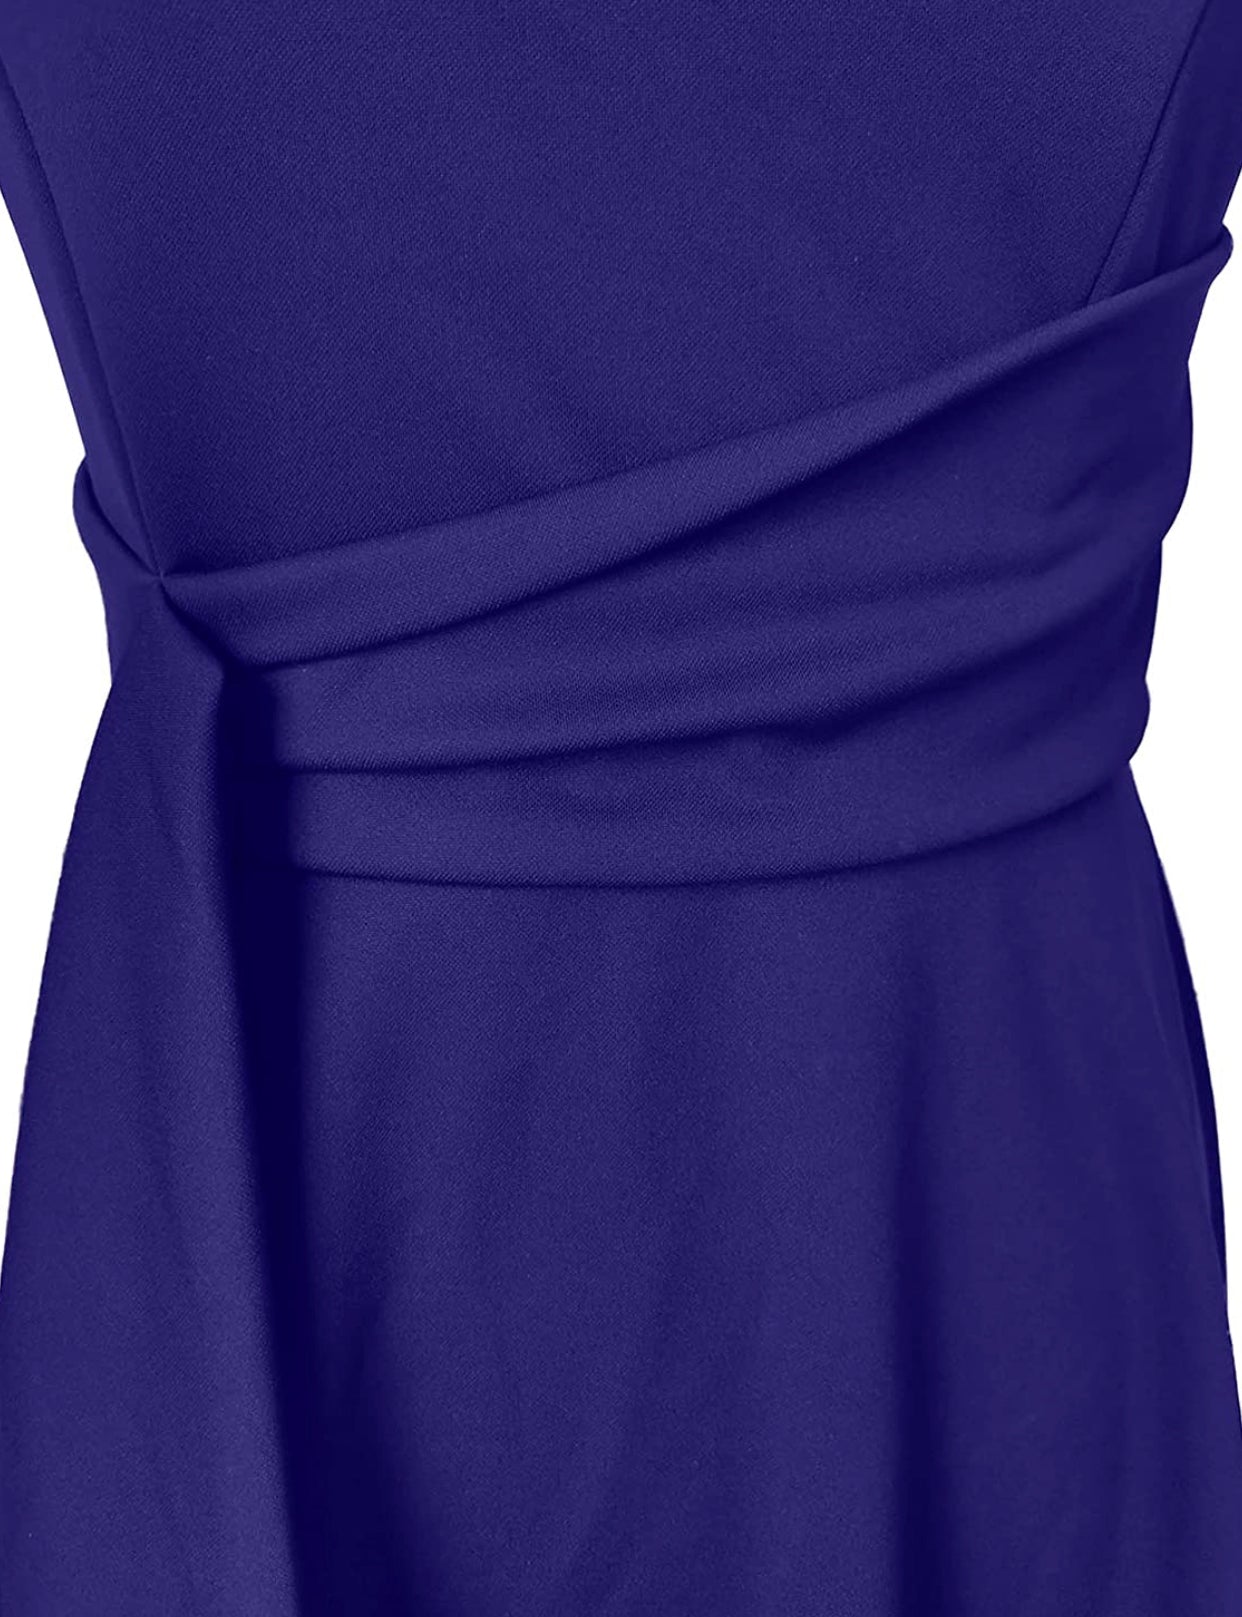 Elegant Audrey Hepburn Style Ruched 3/4 Sleeve Casual Swing A-line Dress (Royal Blue)